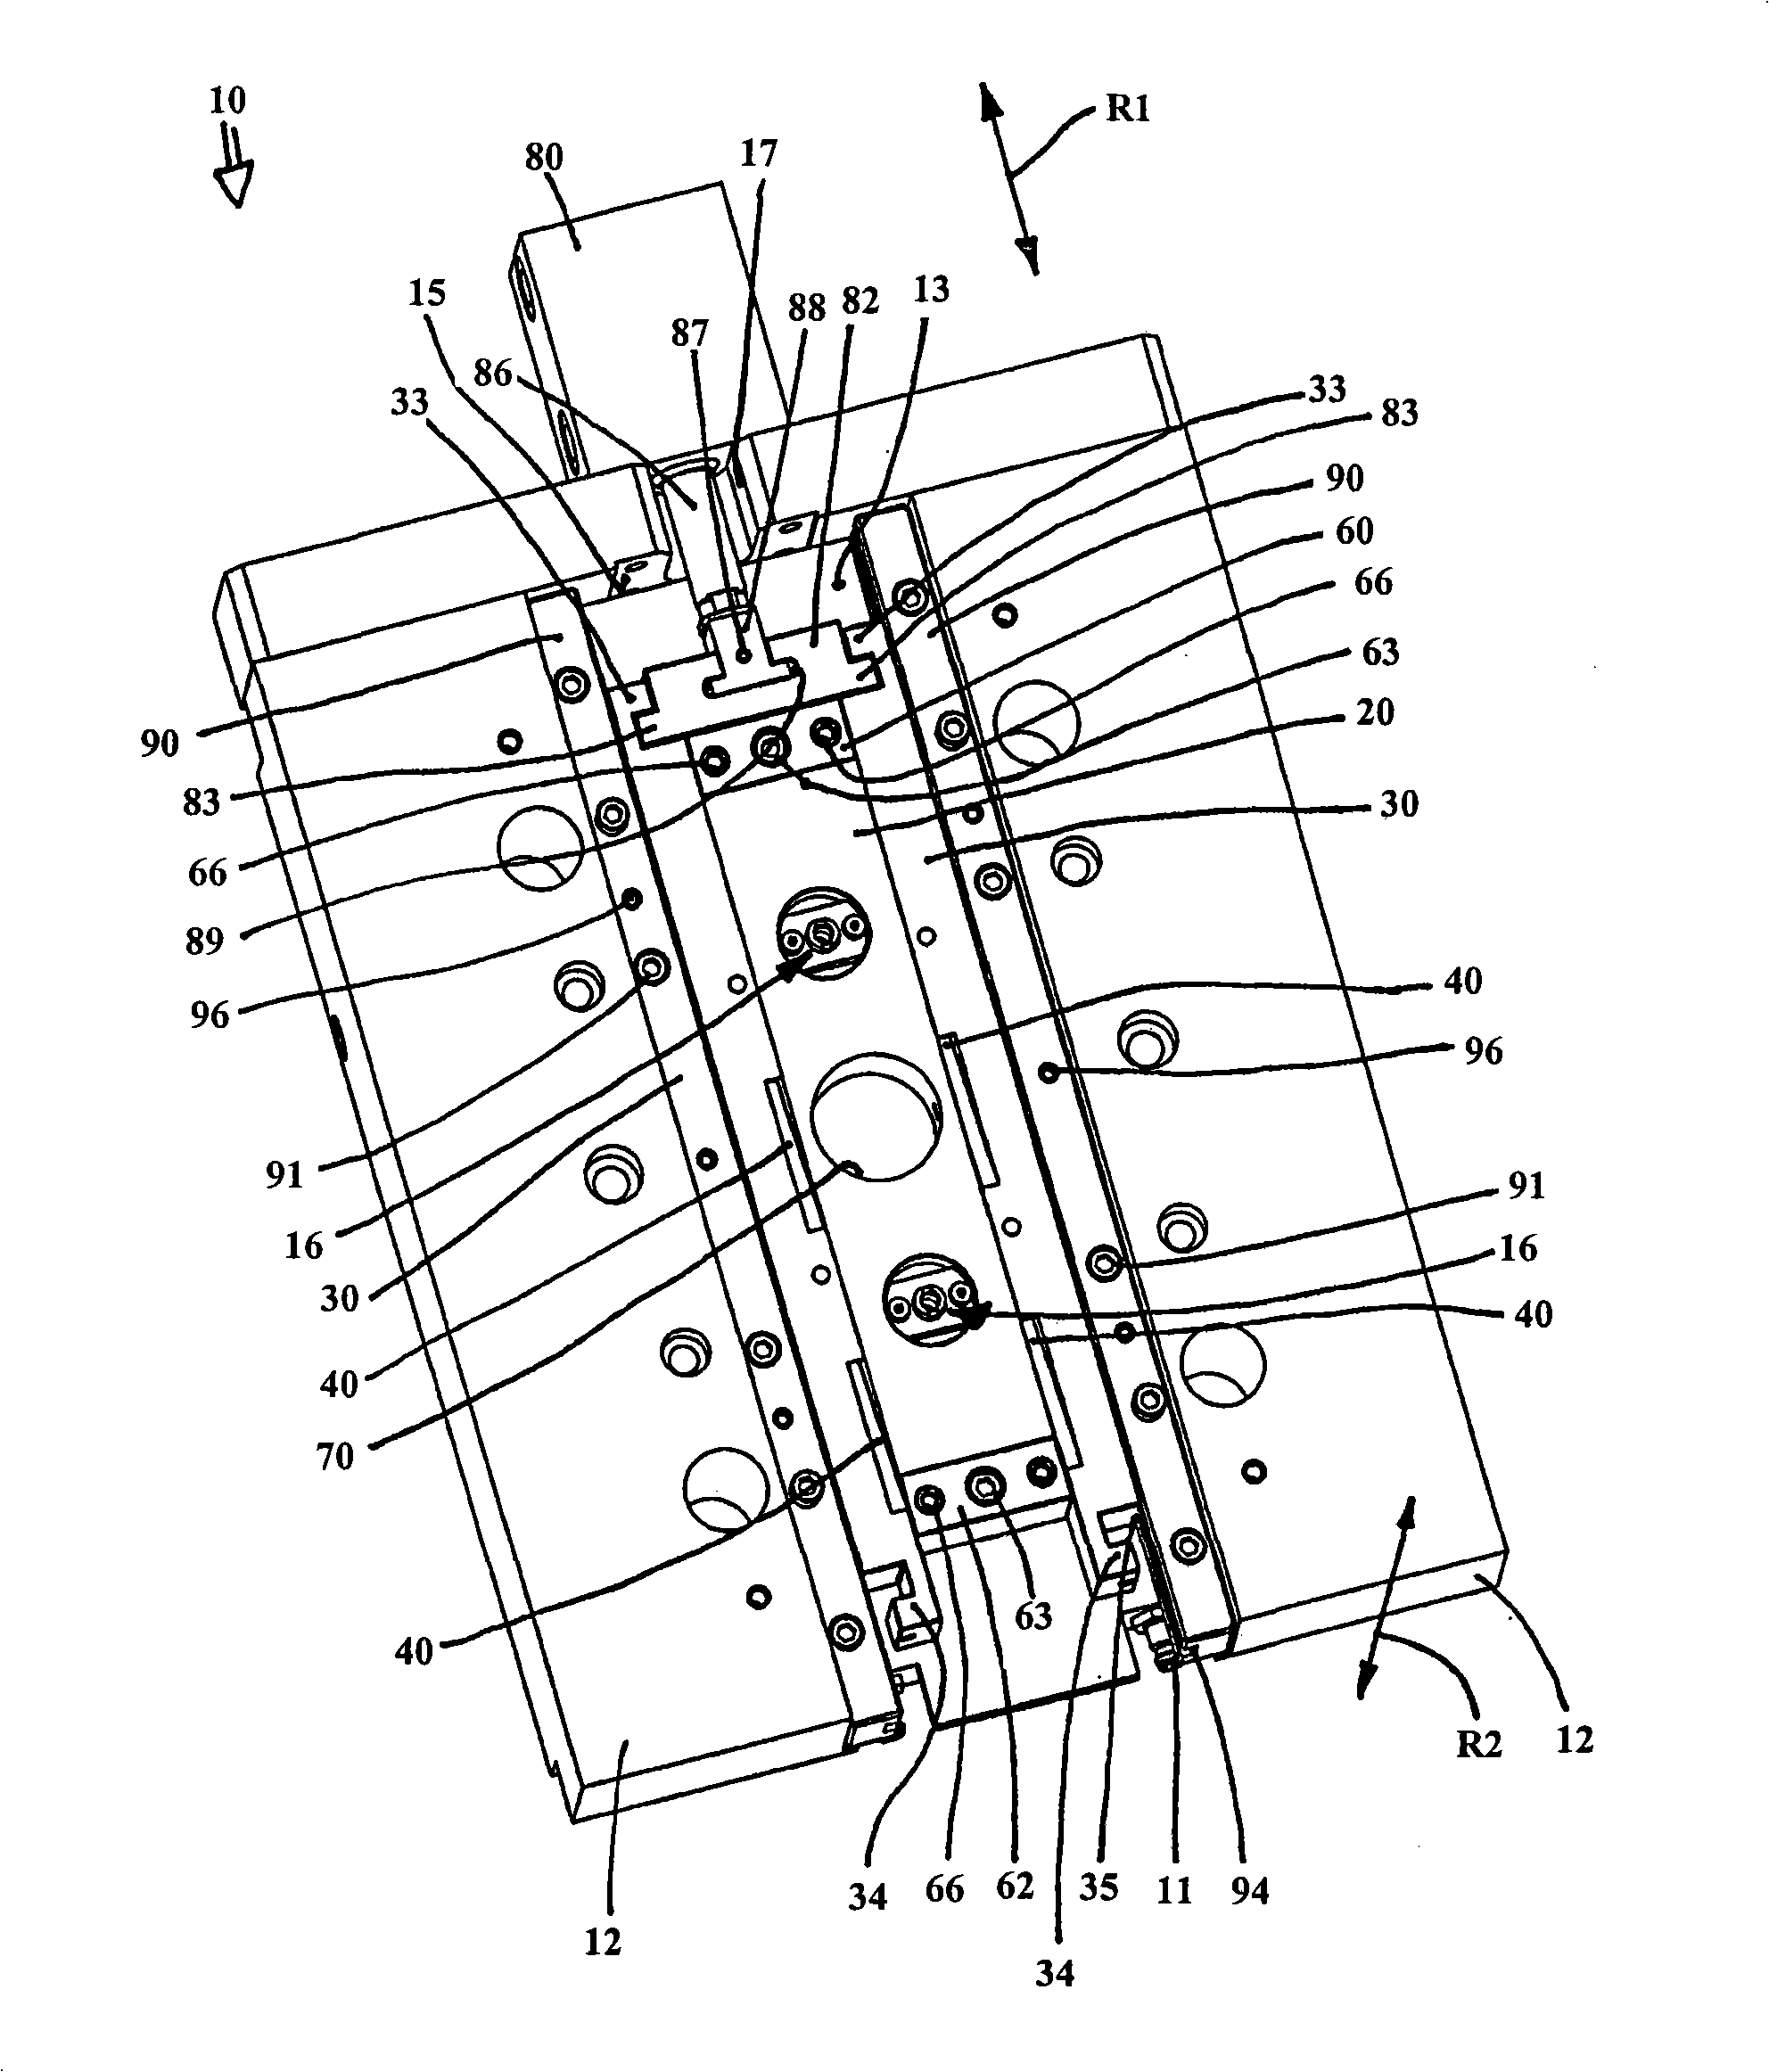 Operating device for shut-off needles in injection-moulding devices with needle valve nozzles